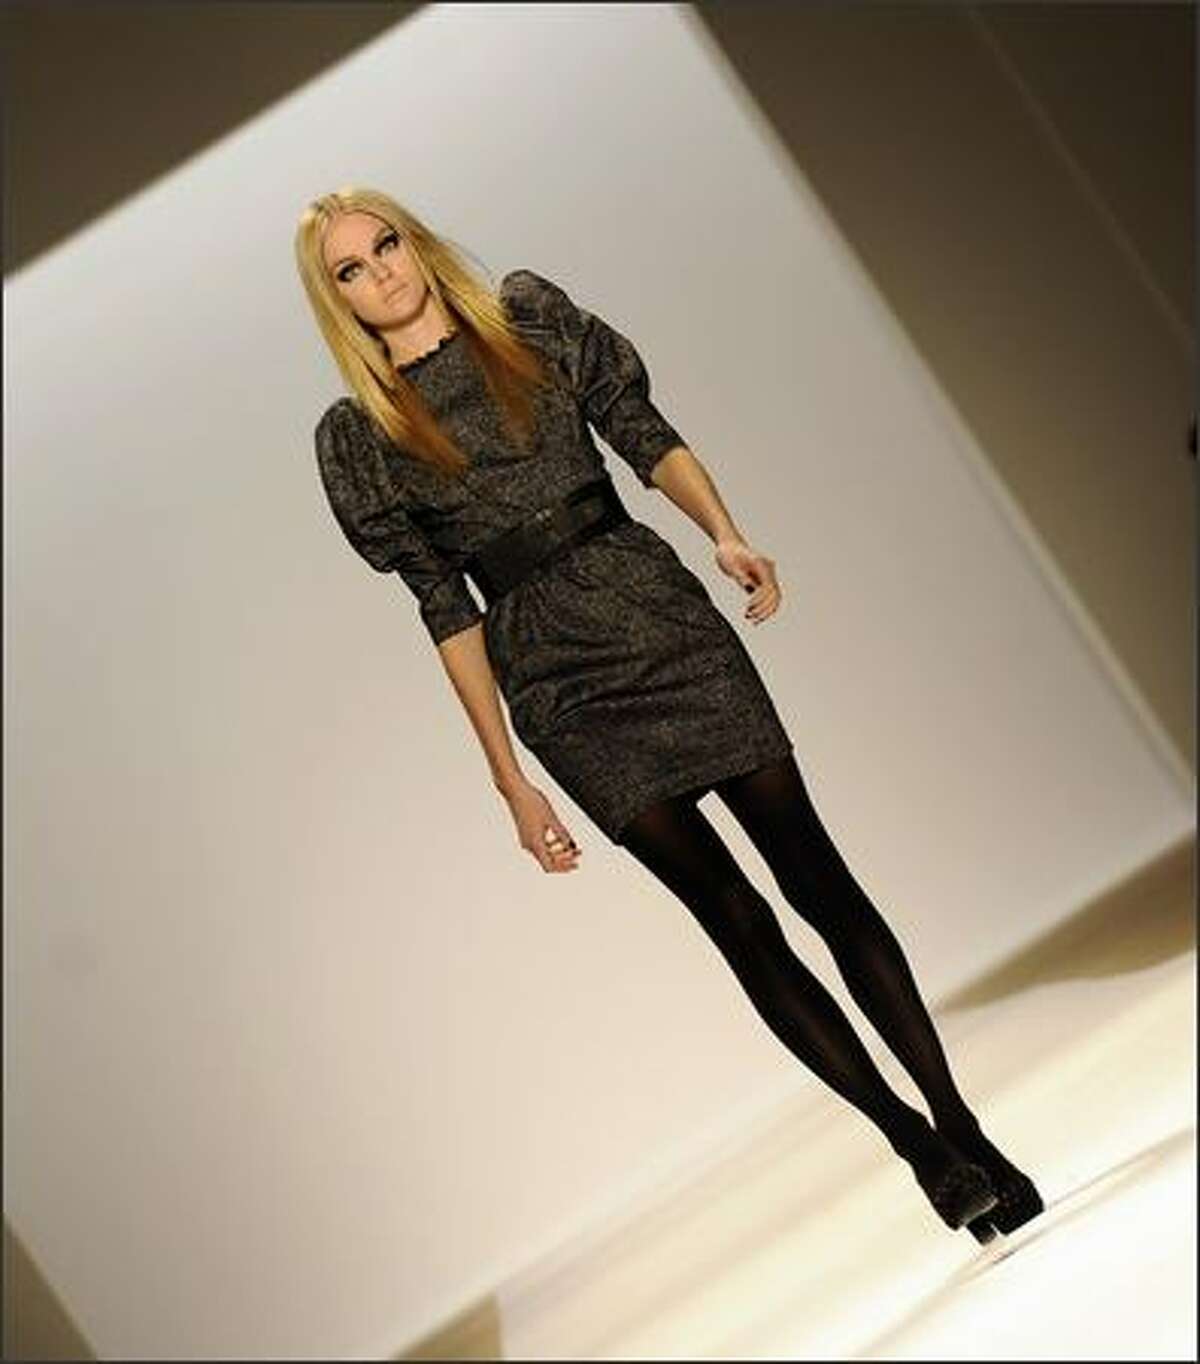 A model during the Yigal Azrouel Collection 2009 Fashion Show at the Mercedes Benz Fashion Week in New York on Friday.